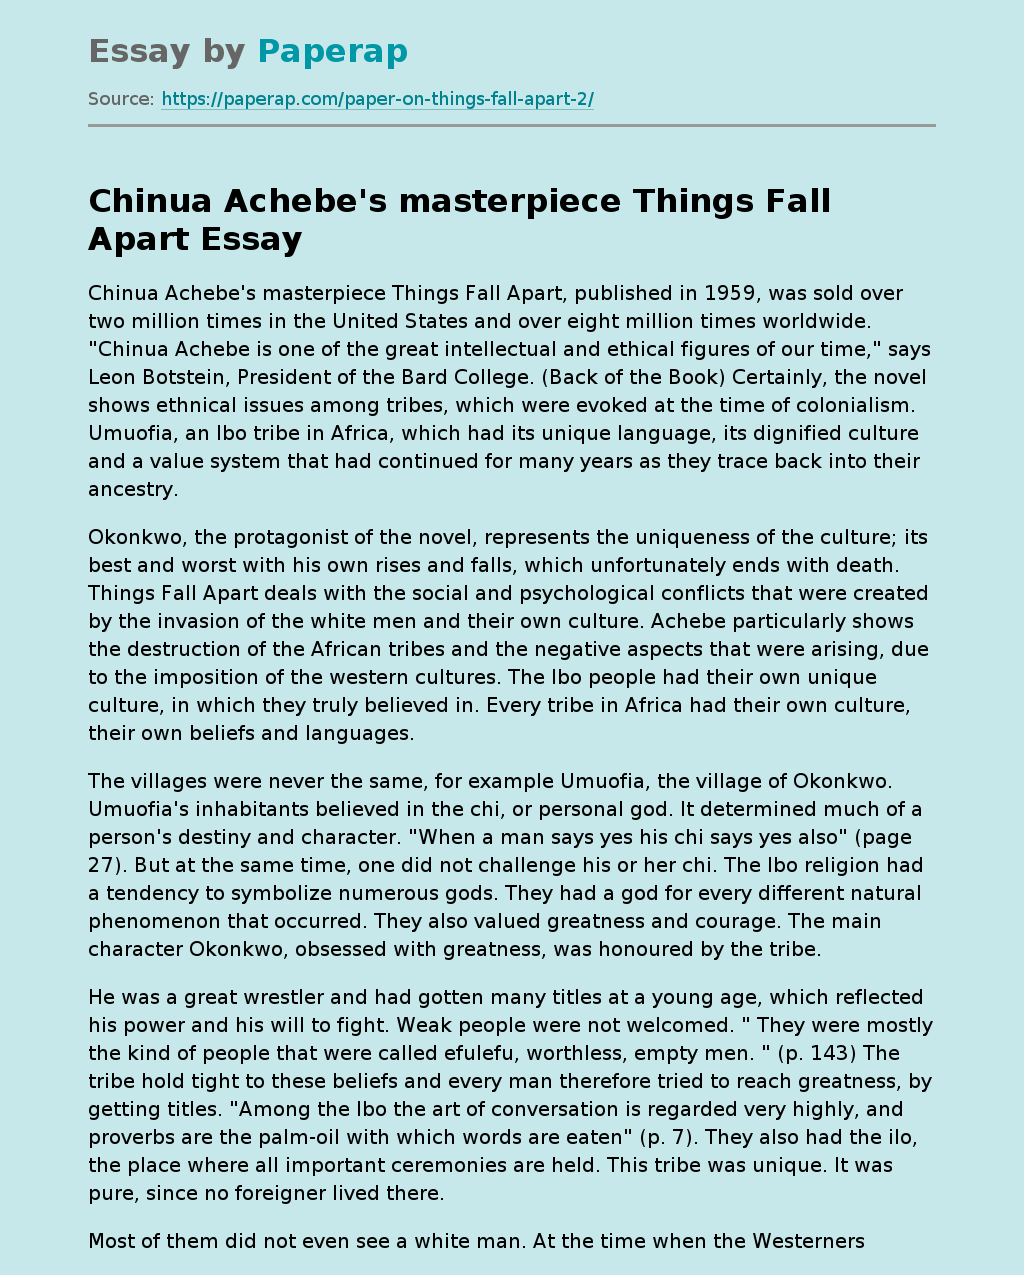 Chinua Achebe's Masterpiece "Things Fall Apart"